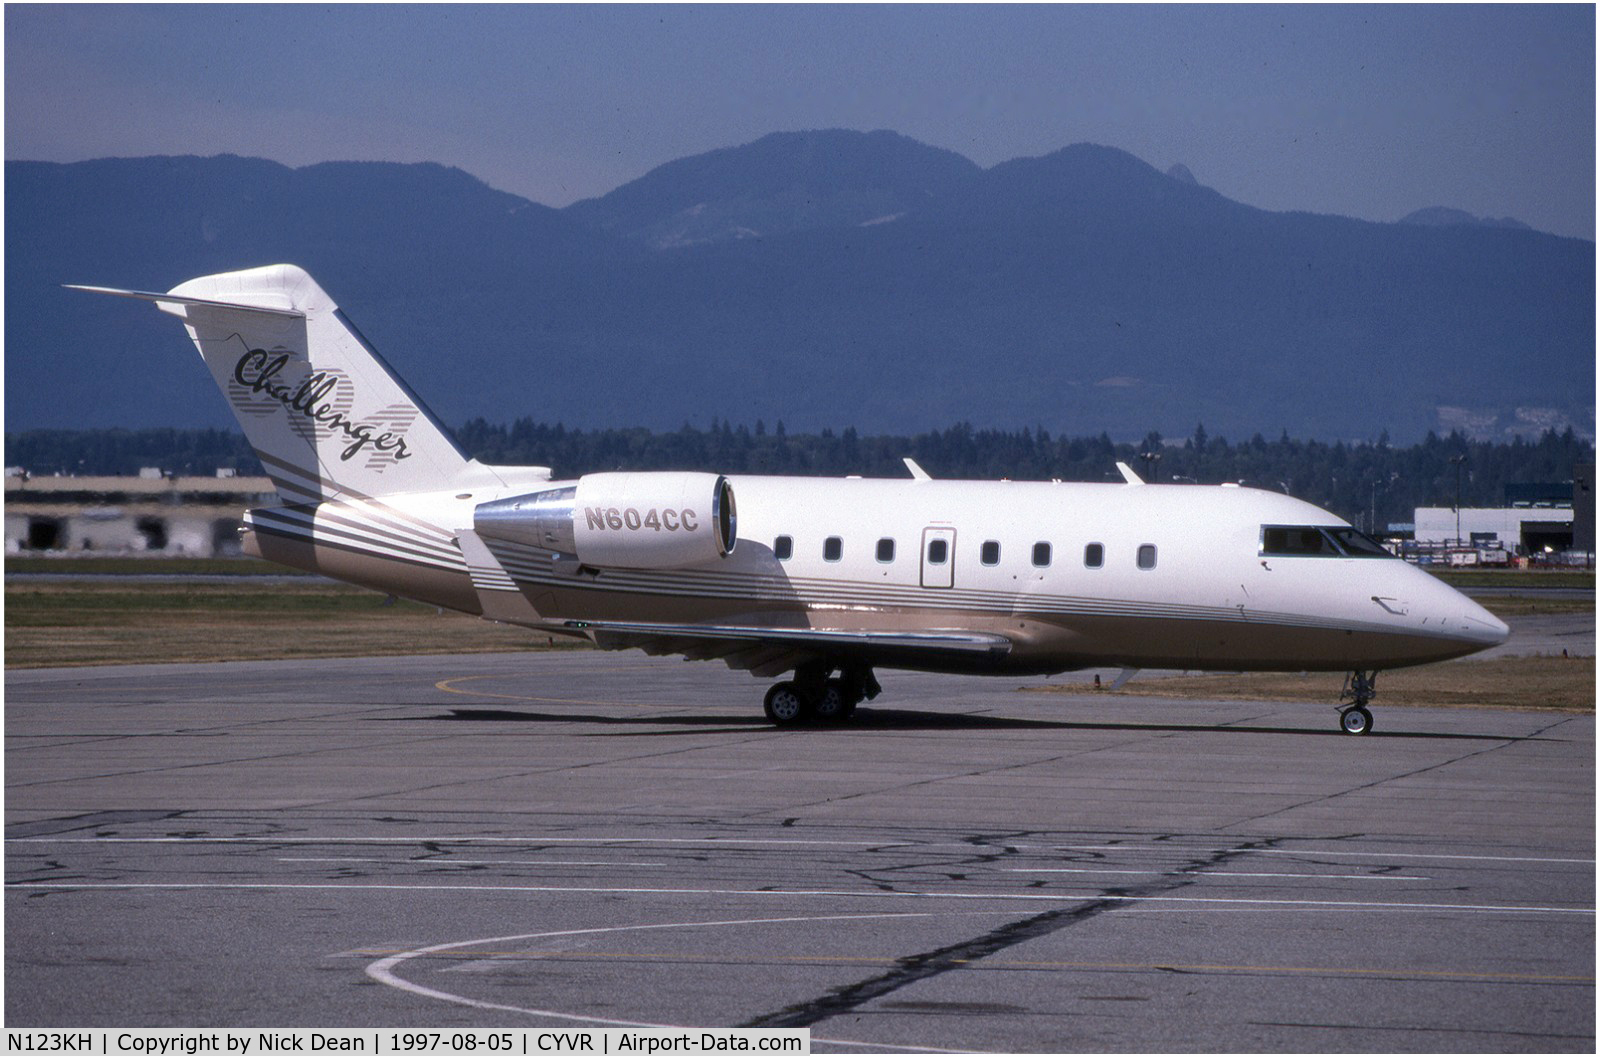 N123KH, 1995 Canadair Challenger 604 (CL-600-2B16) C/N 5301, CYVR (N604CC has been carried by 11 airframes this aircraft was the 5th to carry the reg and is now registered N123KH as posted)